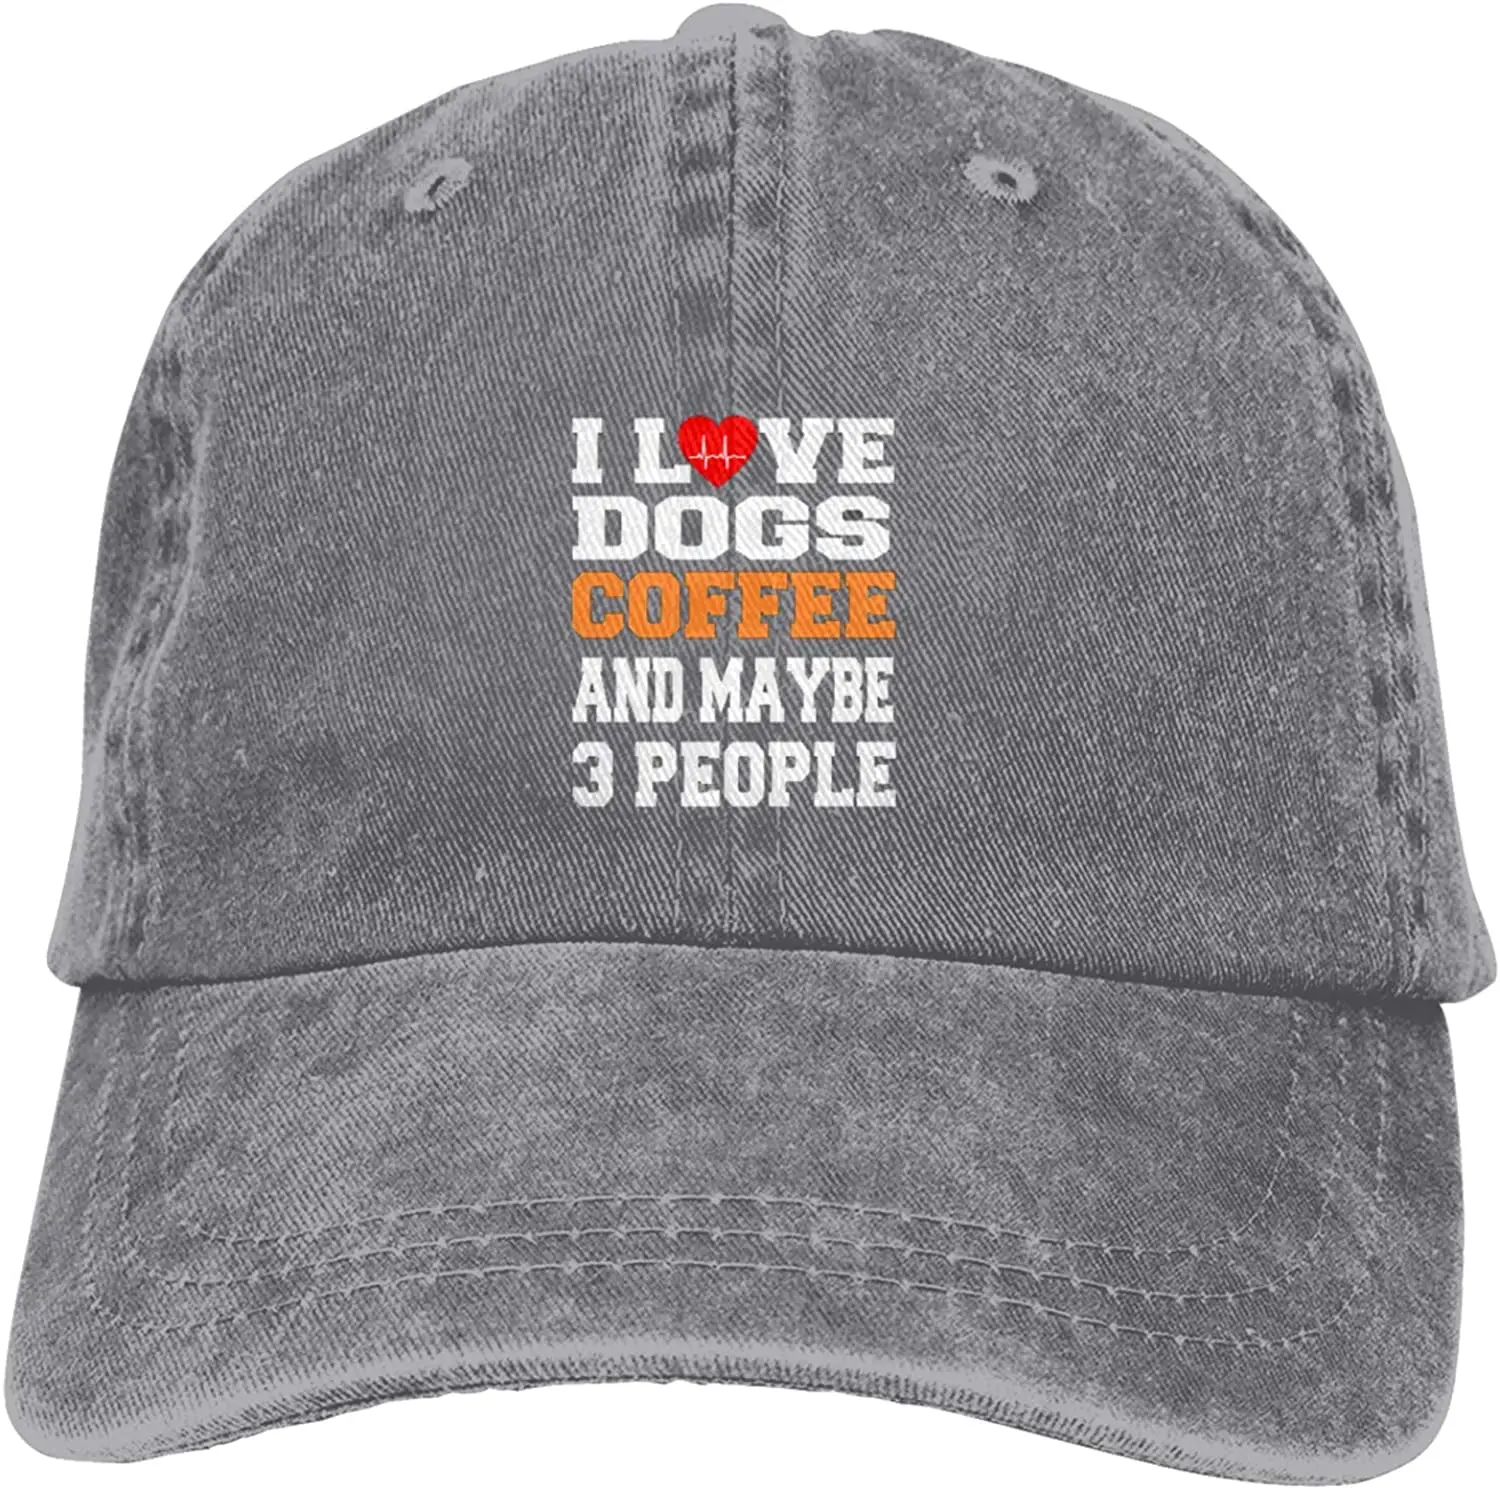 I Love Dogs Coffee and Maybe 3 People Baseball Caps Cotton Washed Adult Cowboy Hats Adjustable for Man Woman